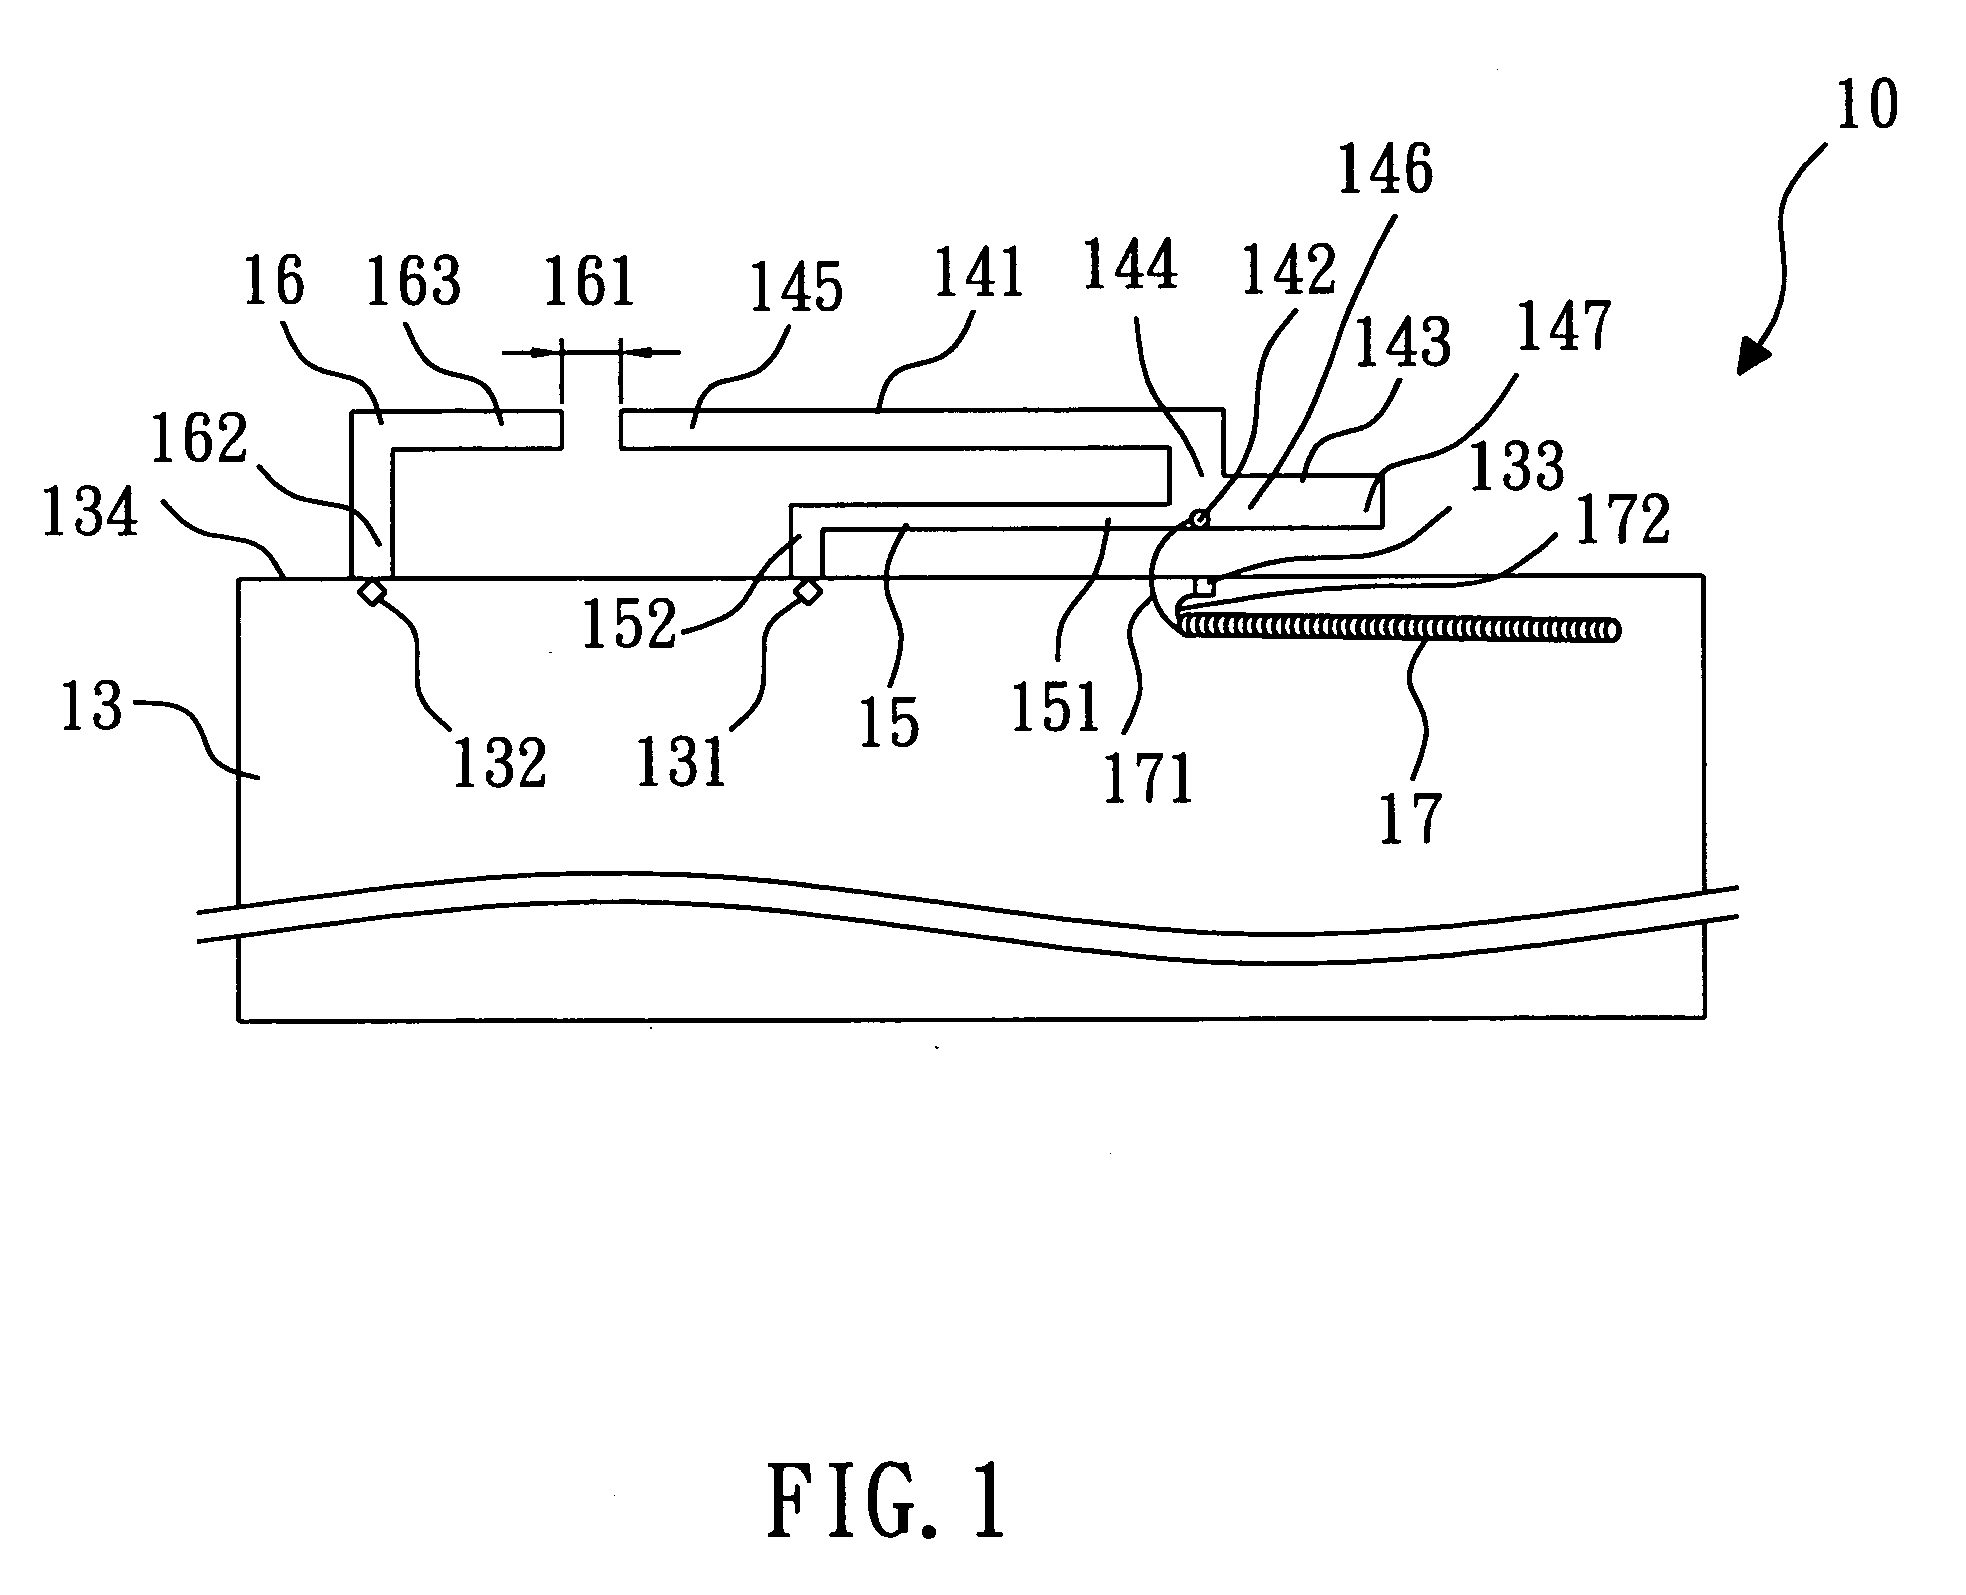 Dual-band inverted-F antenna with shorted parasitic elements